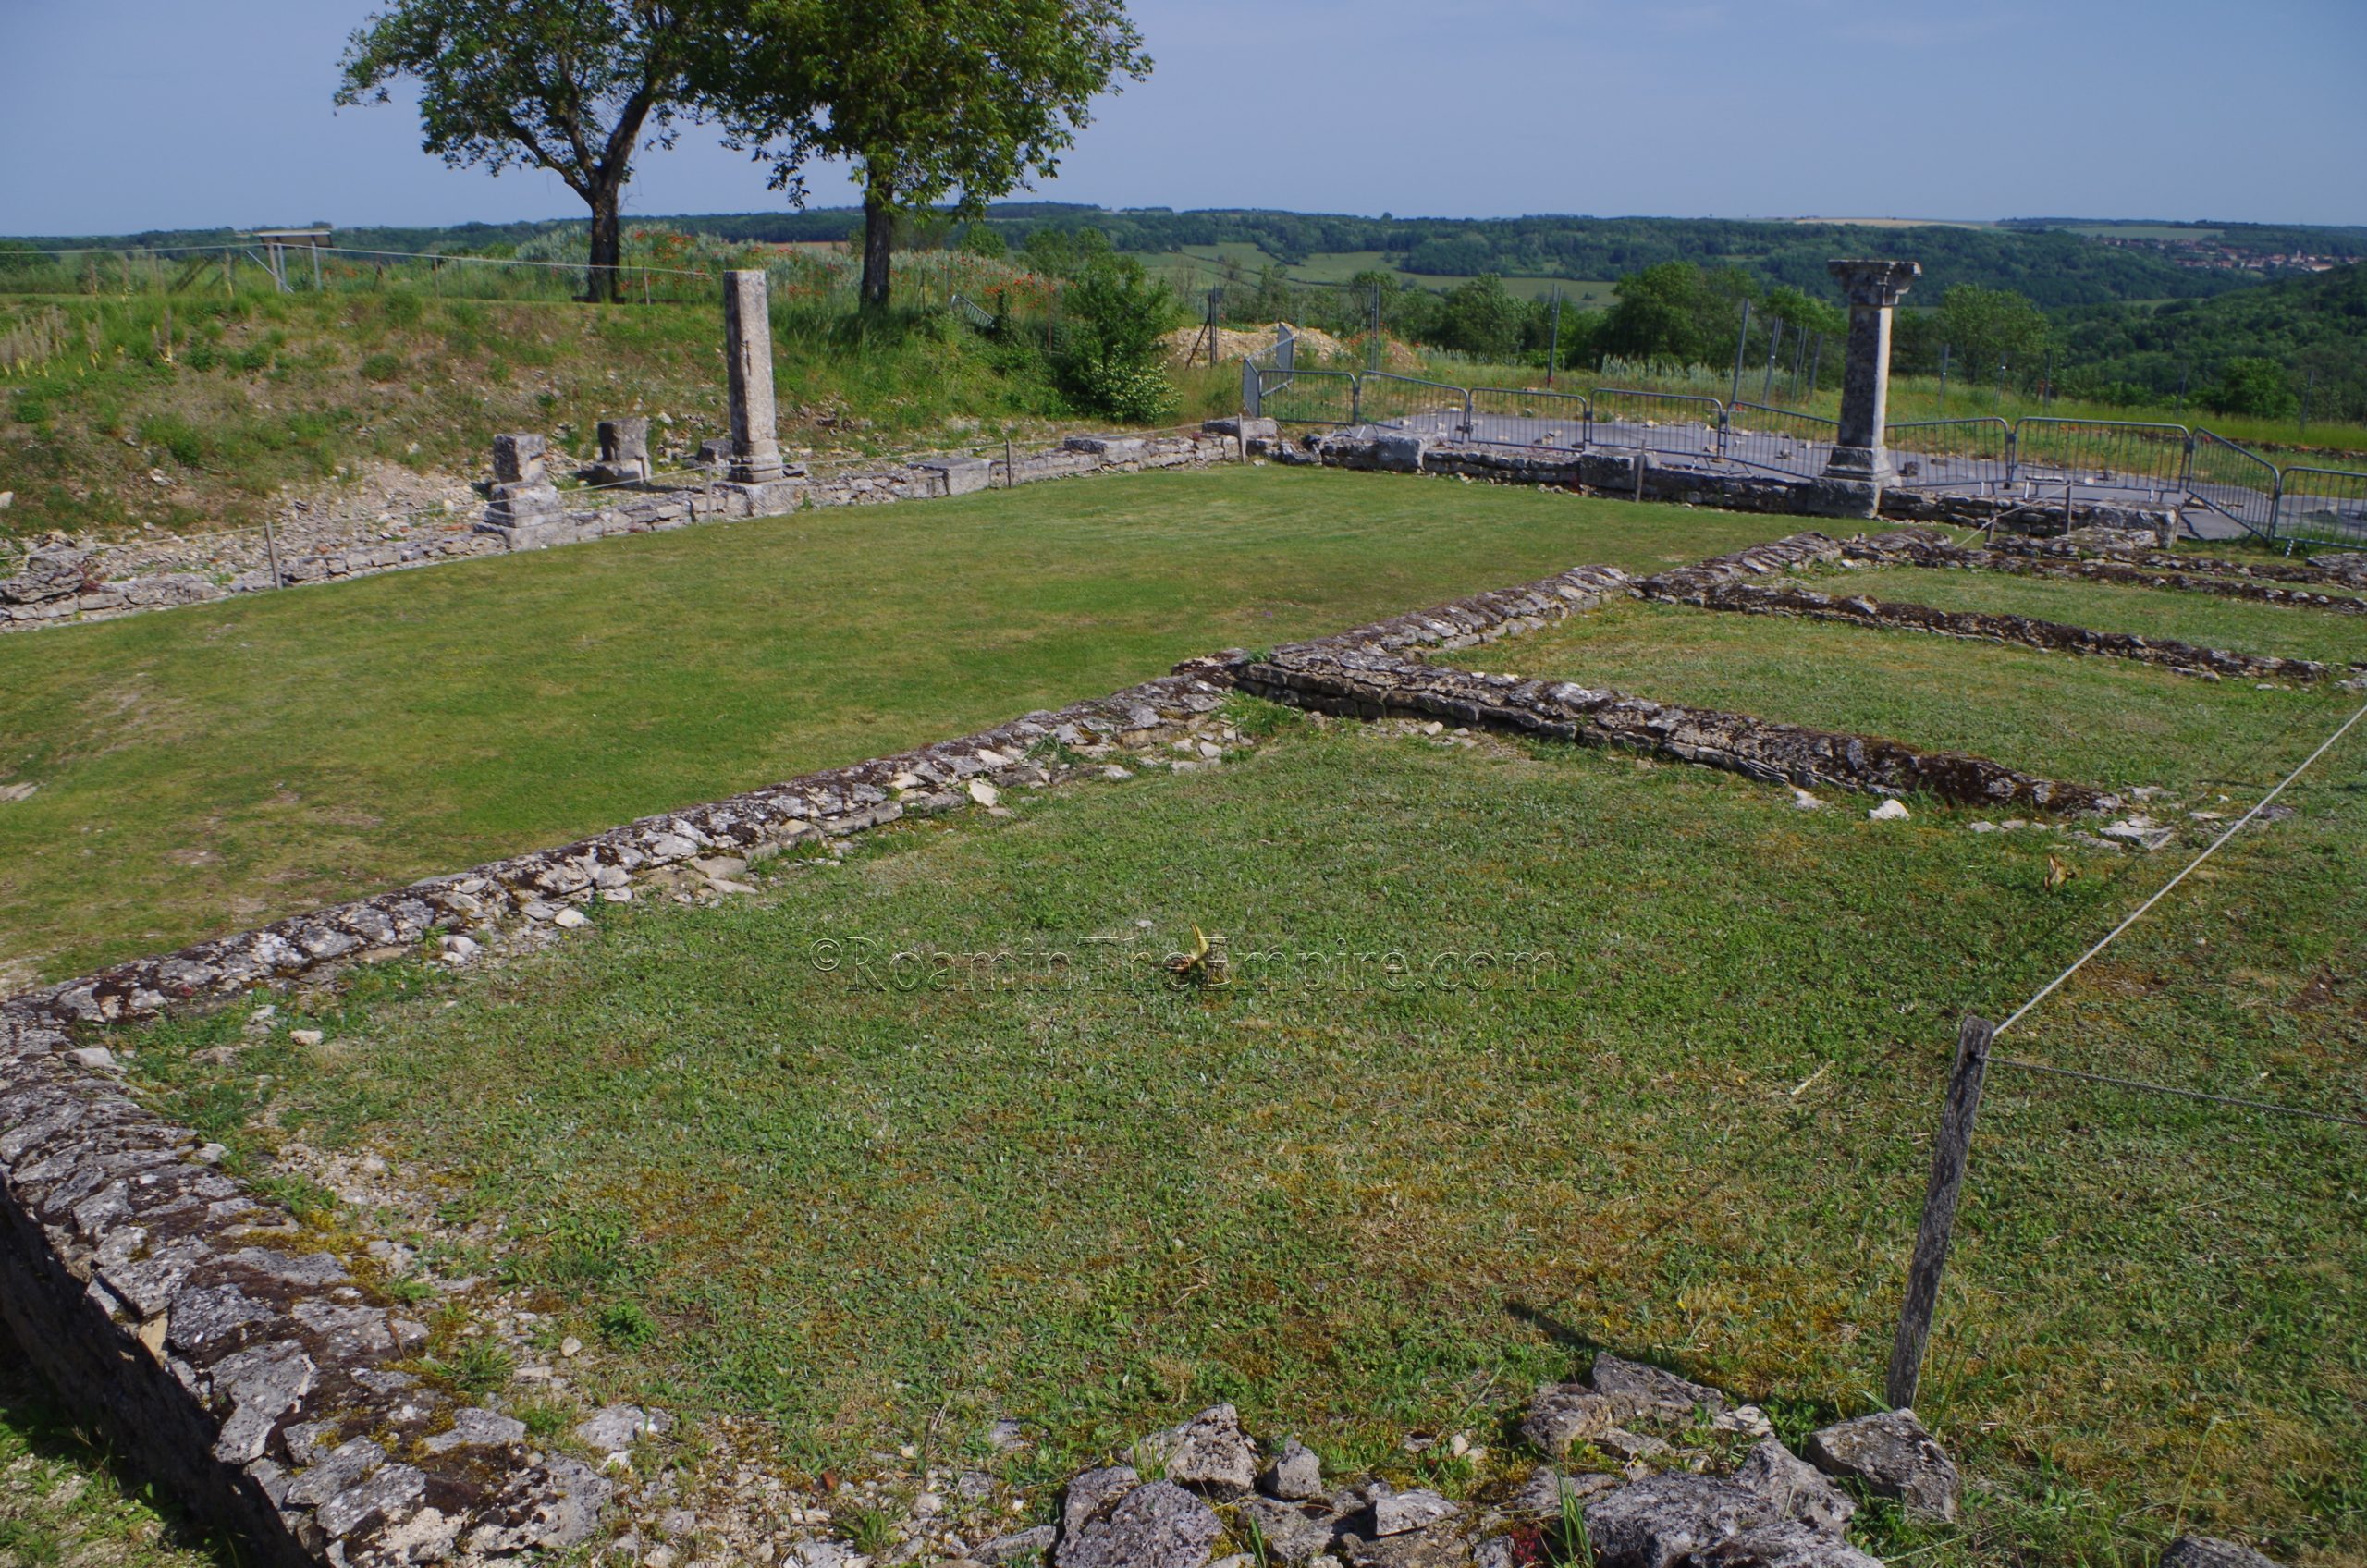 Courtyard of the Monument of Ucuetis, an area dedicated to the local Gallic deity Ucuetis and his consort Bergusia.